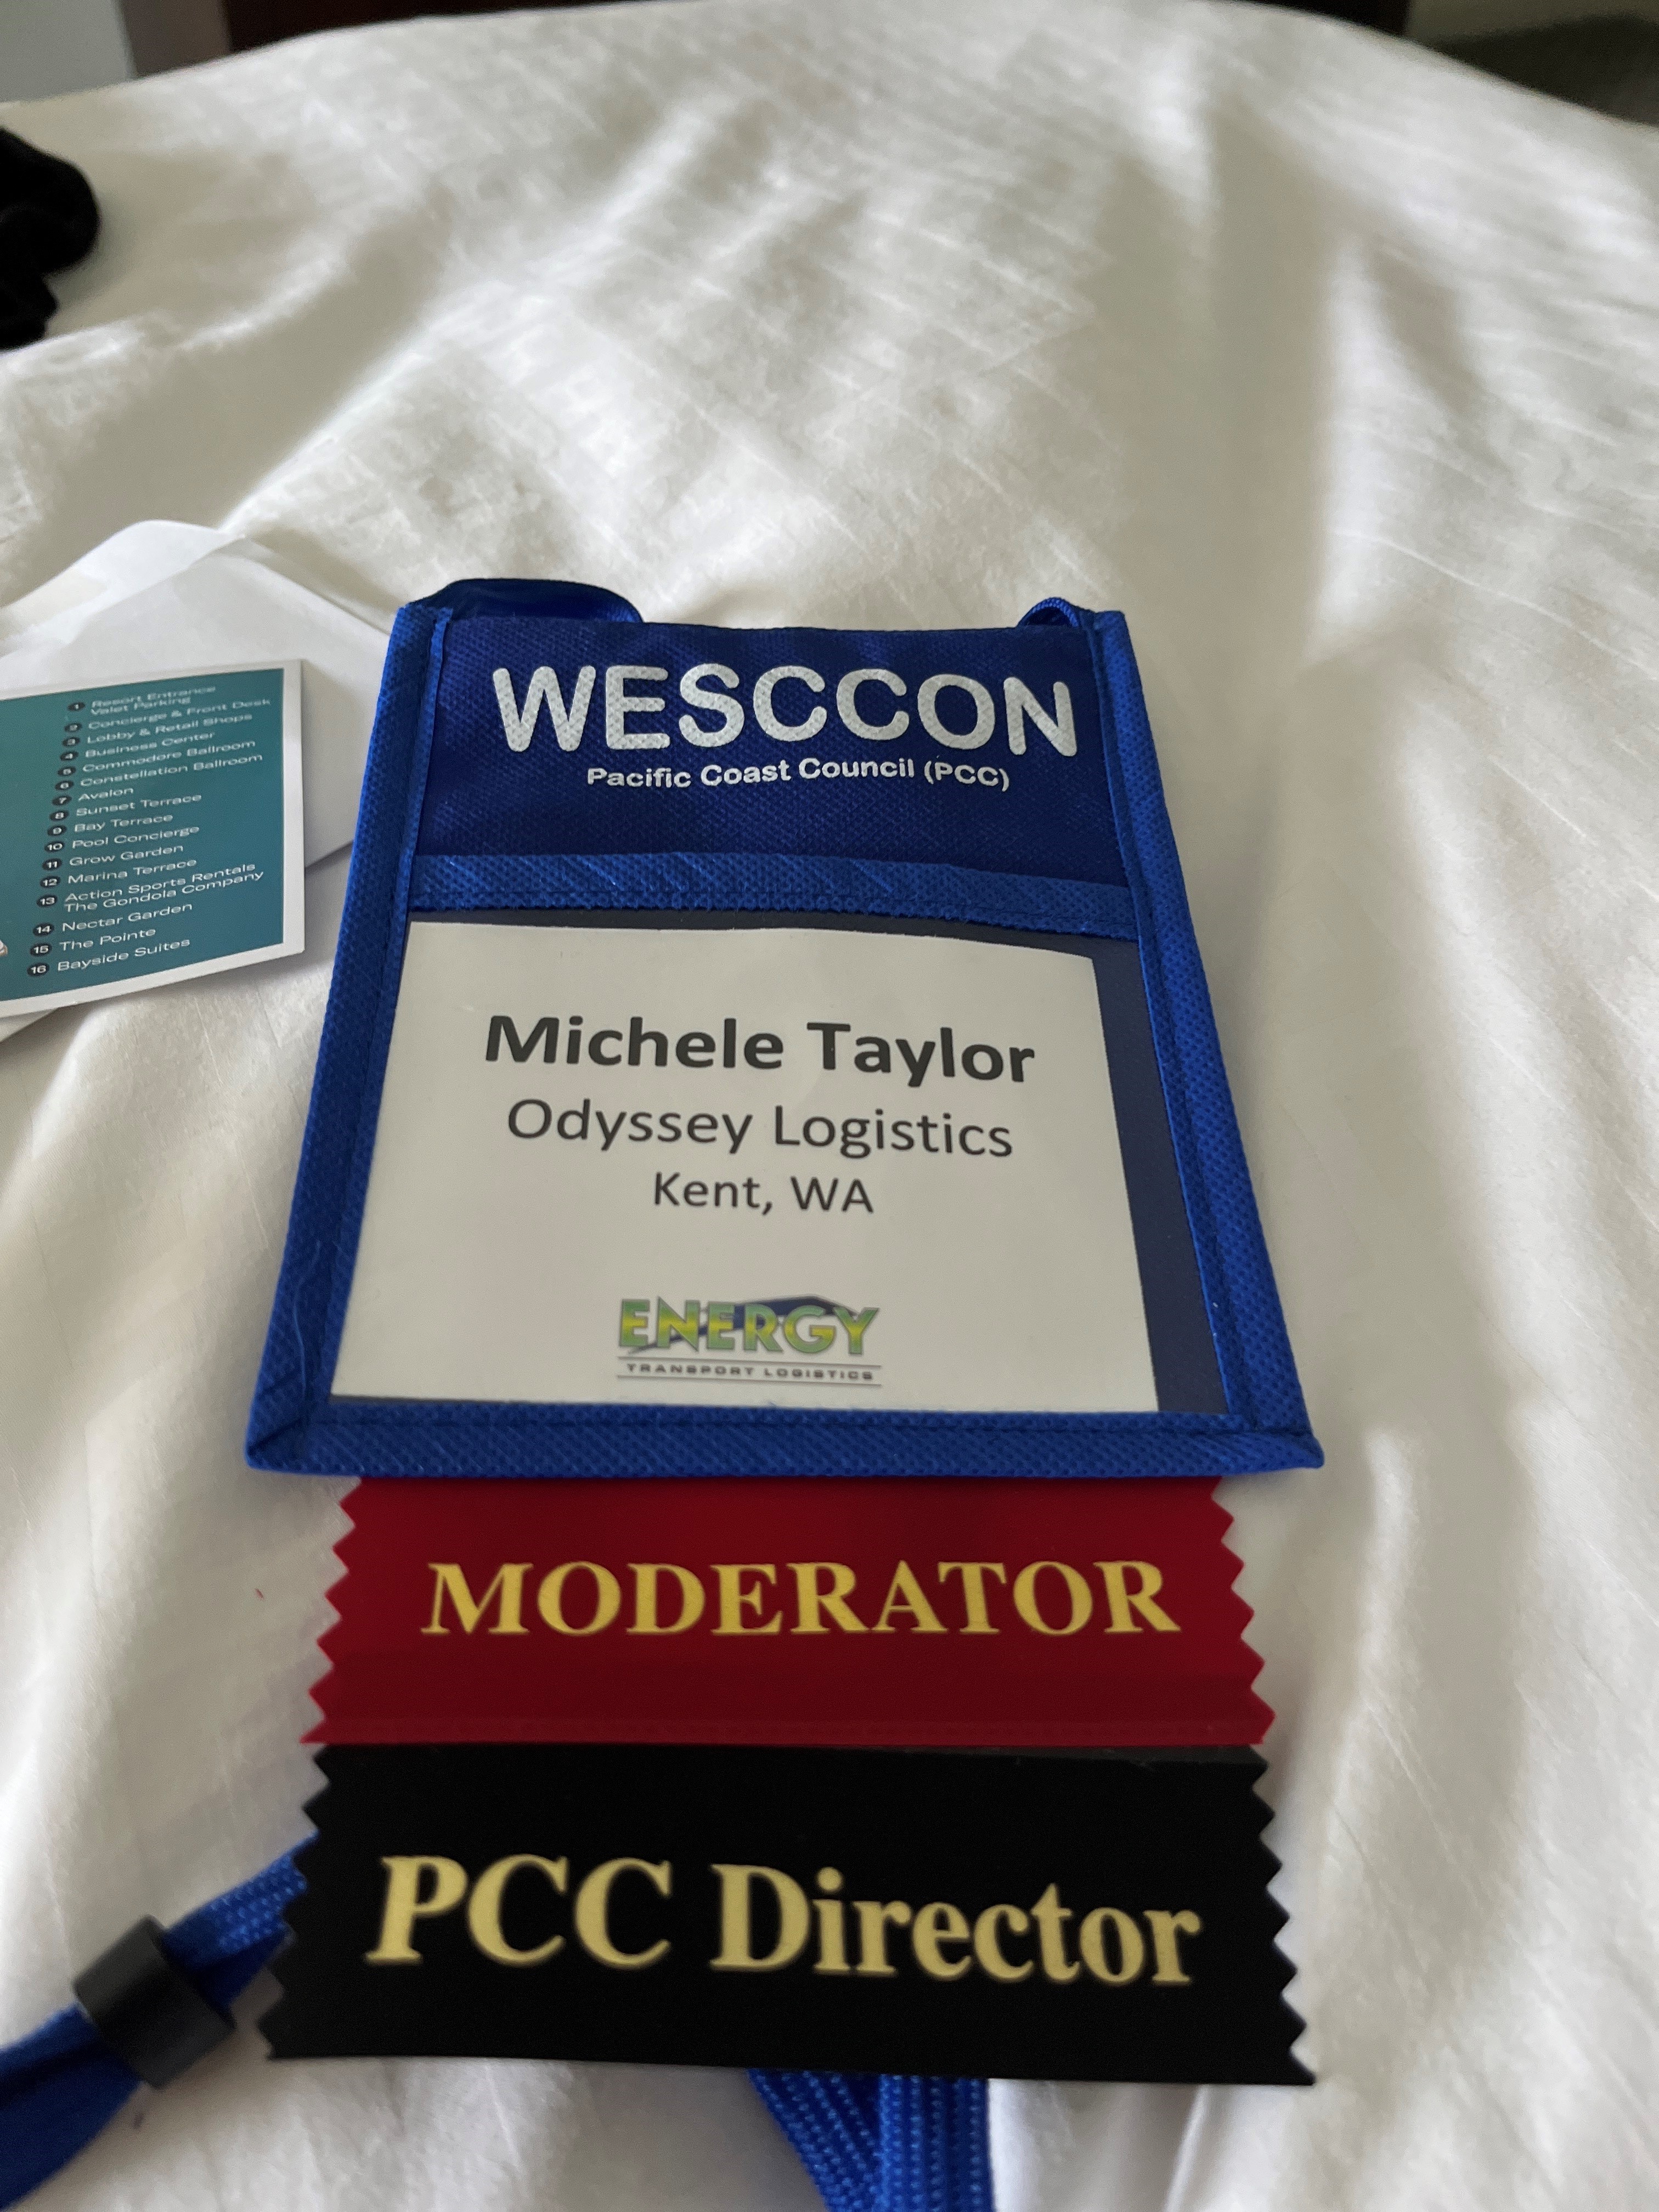 Registered for WESCCON